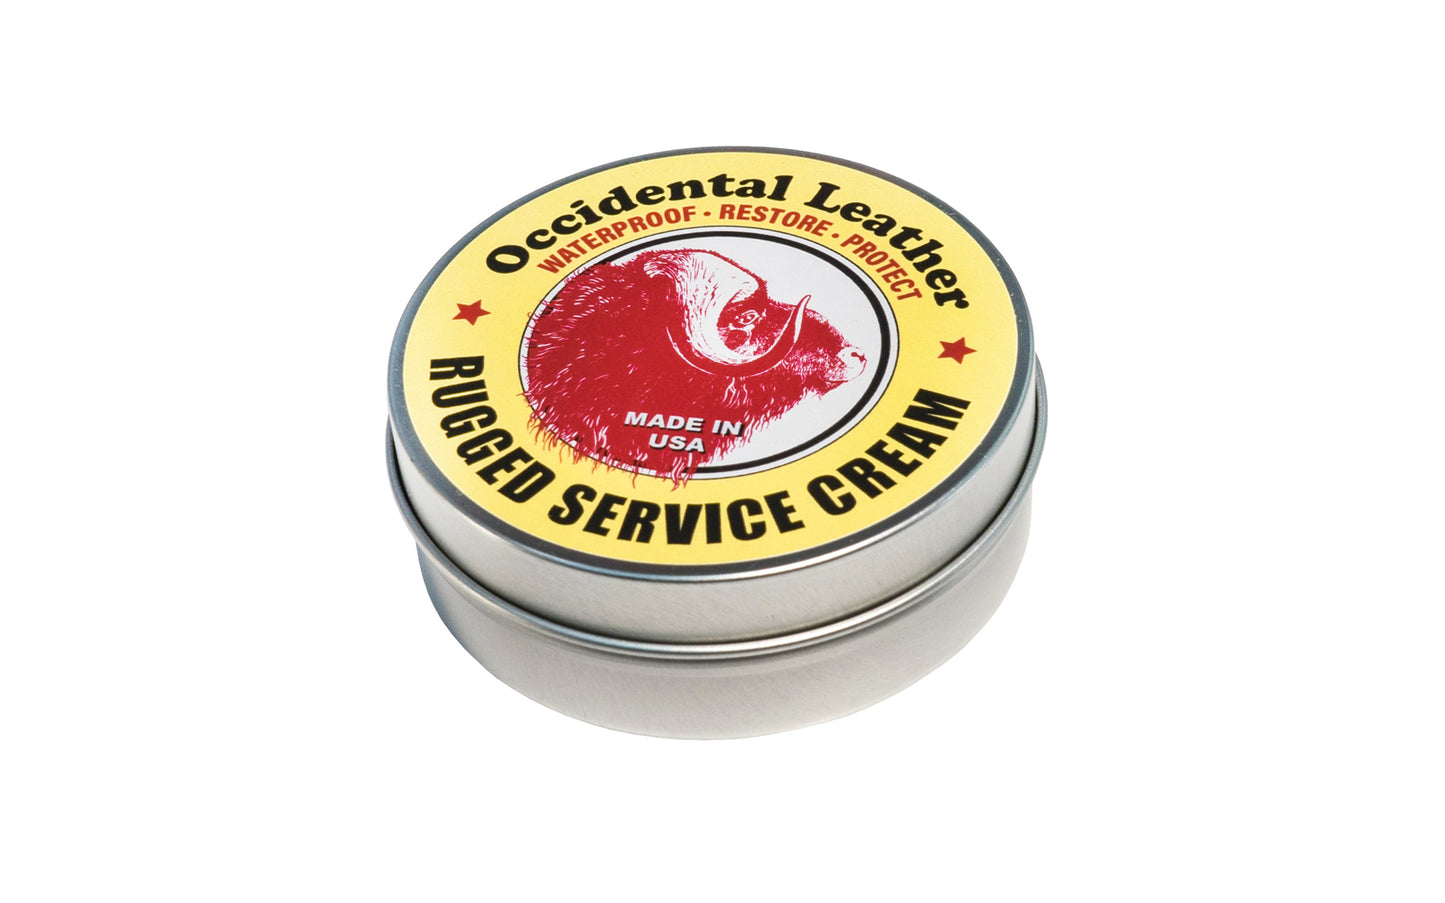 Made in USA - Rugged Service Cream by Occidental Leather coats & penetrates fibers to inhibit oxidation, & maintains a desirable level of lubrication in leather, allowing fibers to bend & move for long life. Cream is chemically neutral, carrying no salts or harsh solvents. Model 3850. Safe on Skin. Beeswax. Natural